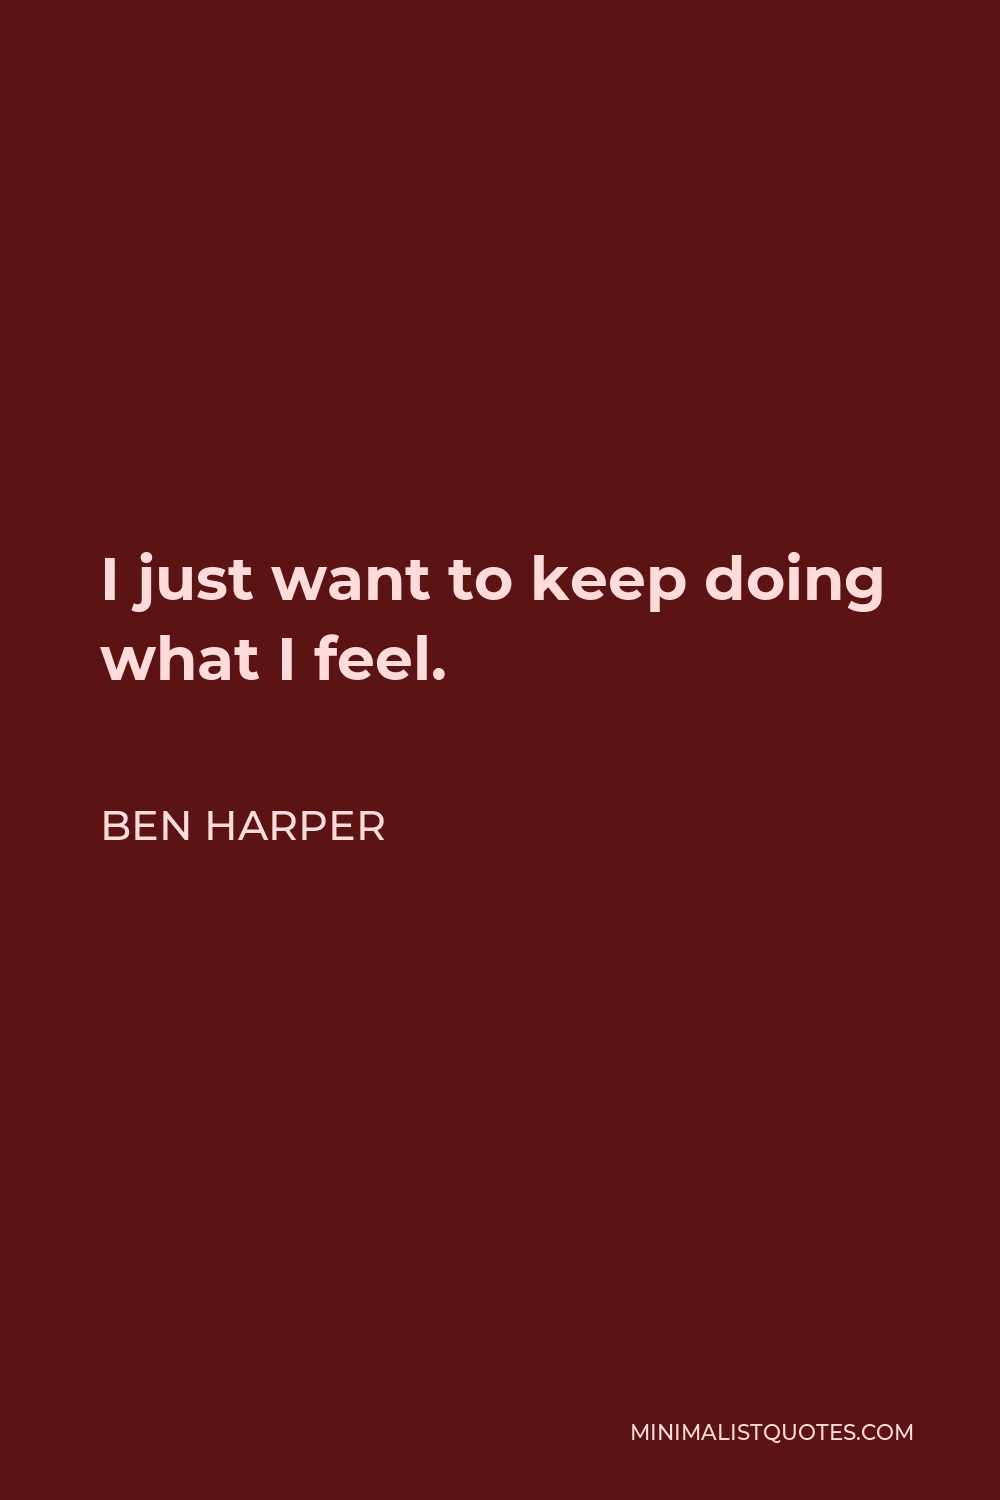 Ben Harper Quote - I just want to keep doing what I feel.